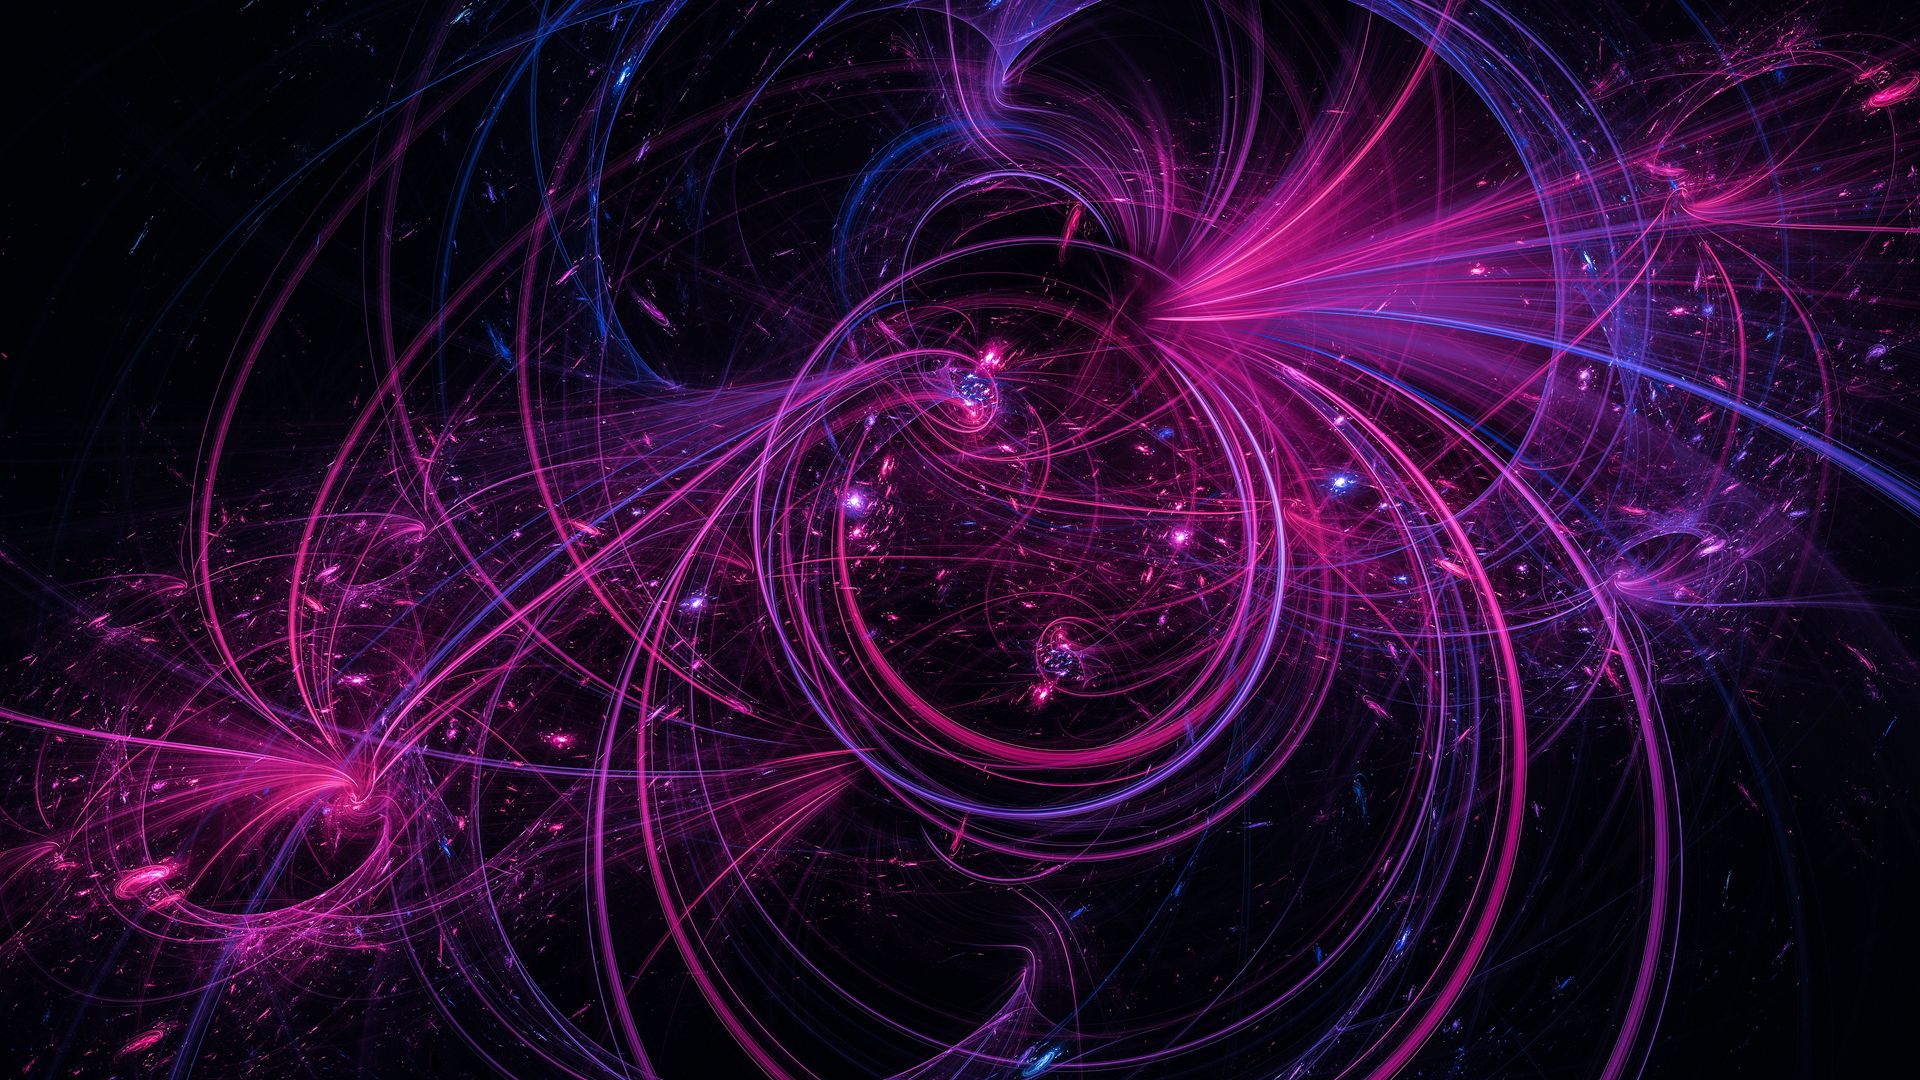 Download wallpaper 1920x1080 lines, tangled, glow, fractal, abstraction  full hd, hdtv, fhd, 1080p hd background